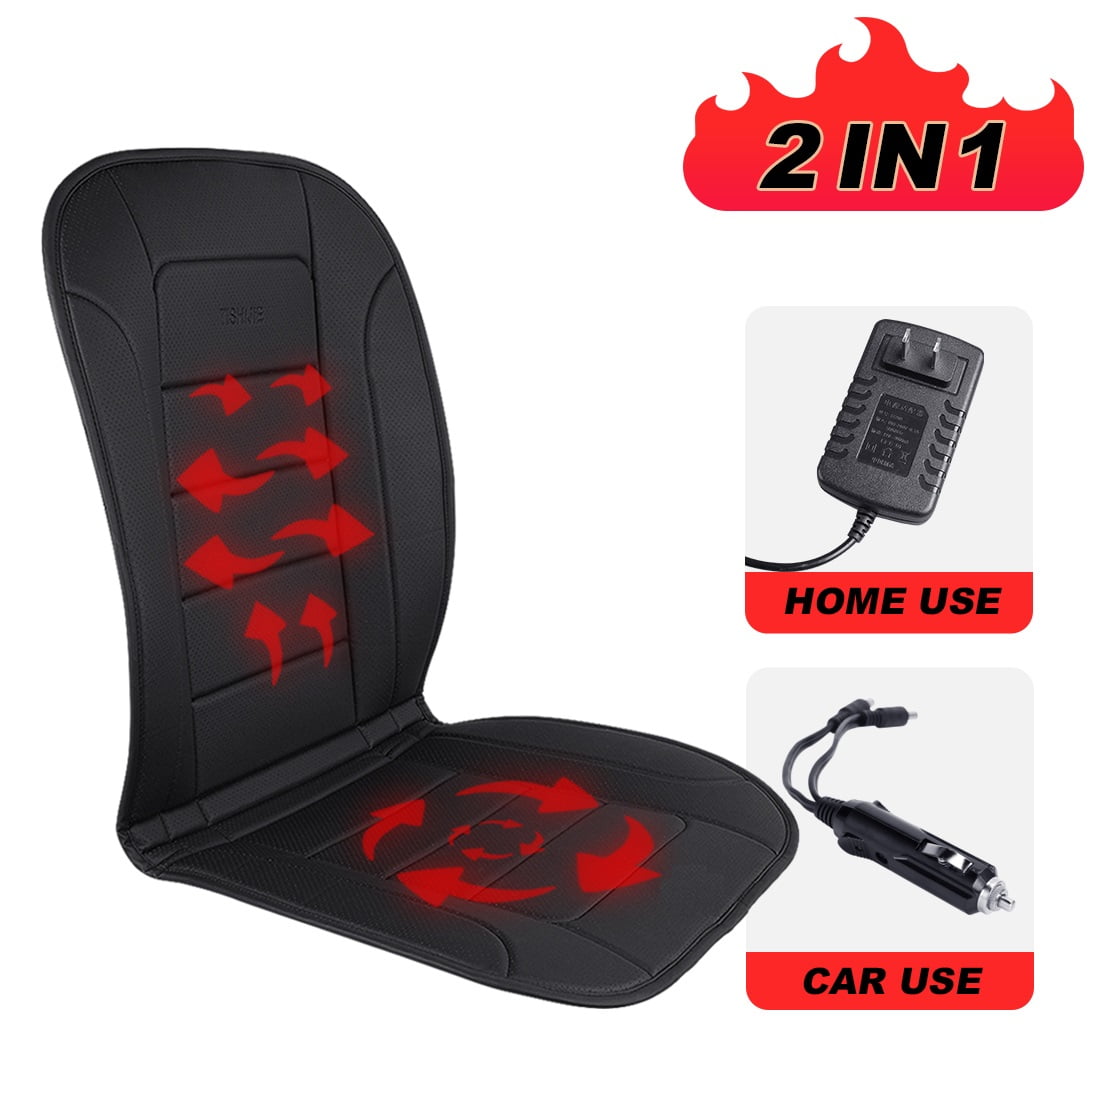 TISHIJIE Car Heated Seat Cushion with Intelligence Temperature Controller,  Heated Seat Cover for Car and Office Chair 